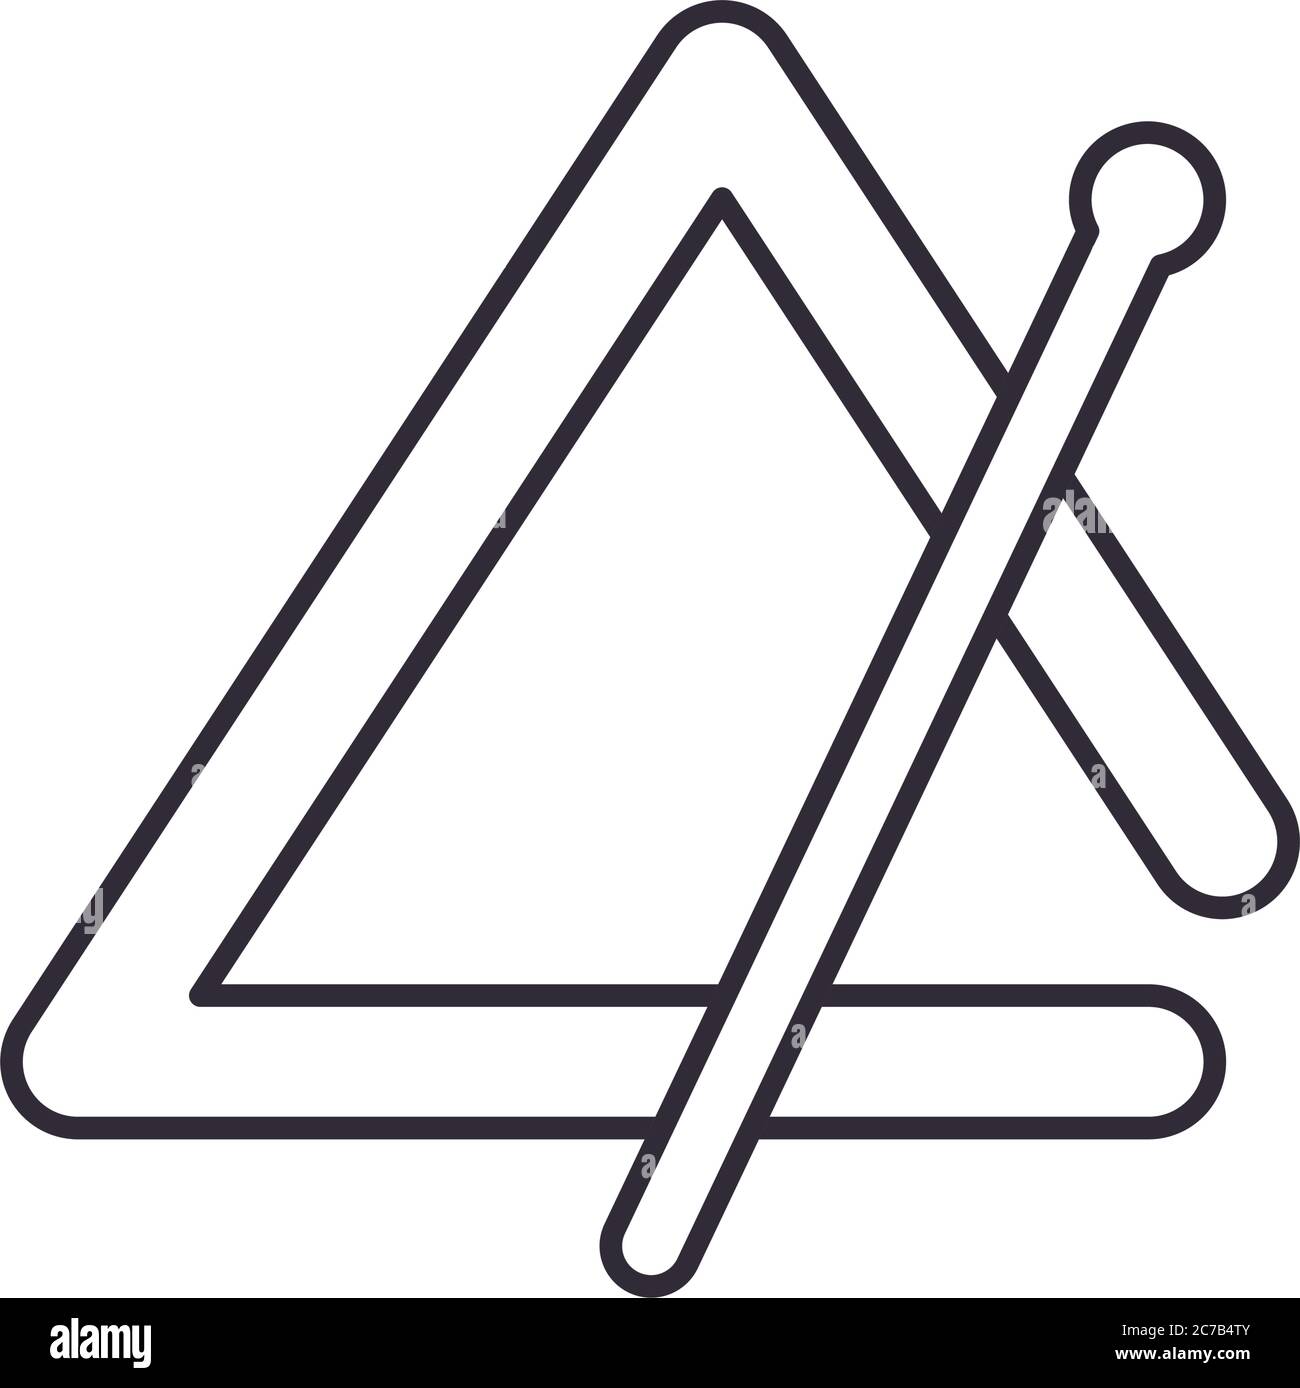 triangle instrument line style icon design, Music sound melody